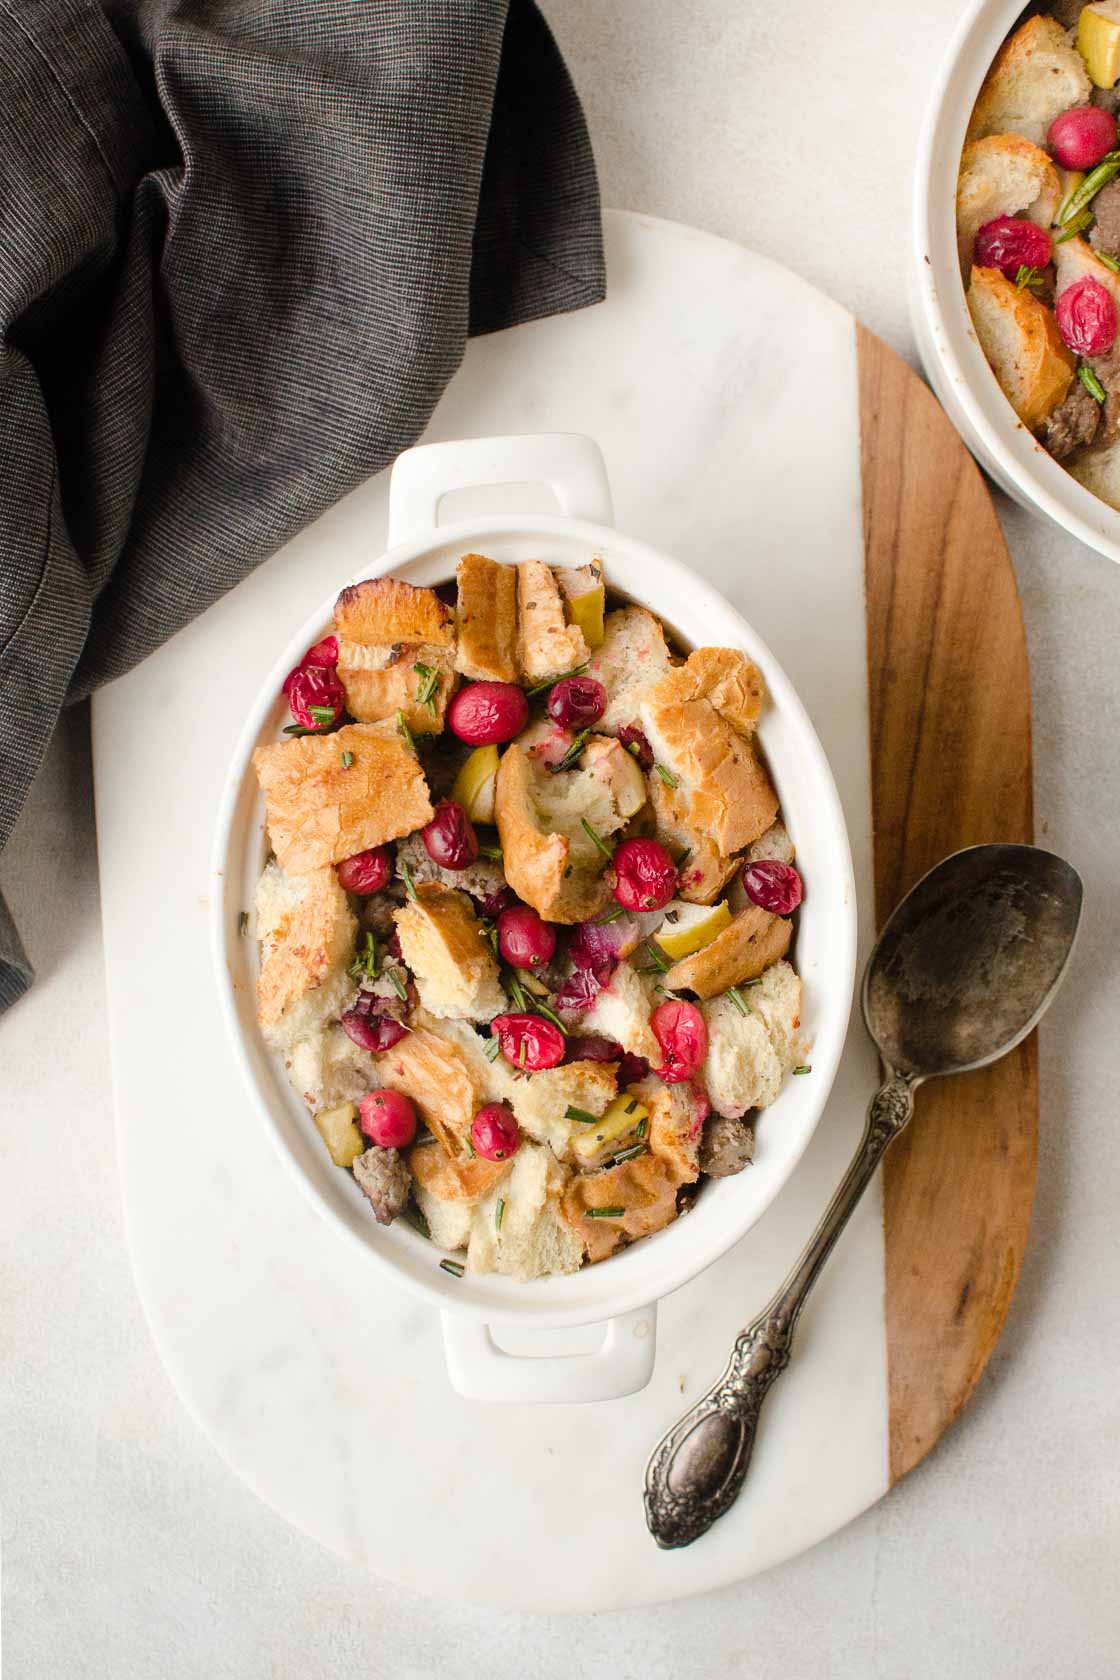 Cranberry Sausage Stuffing (or Dressing)